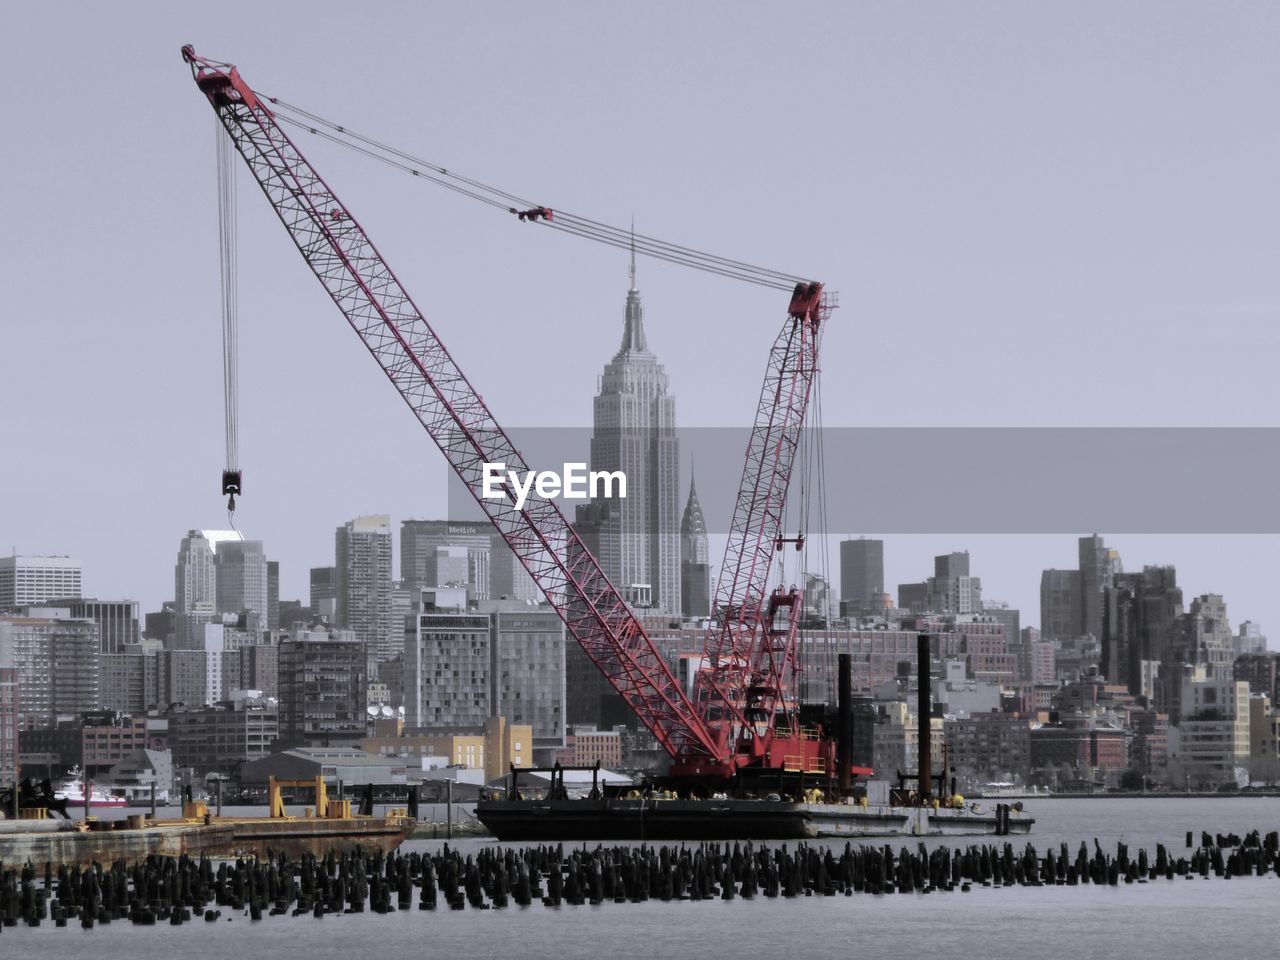 Empire state building seen through crane at commercial dock